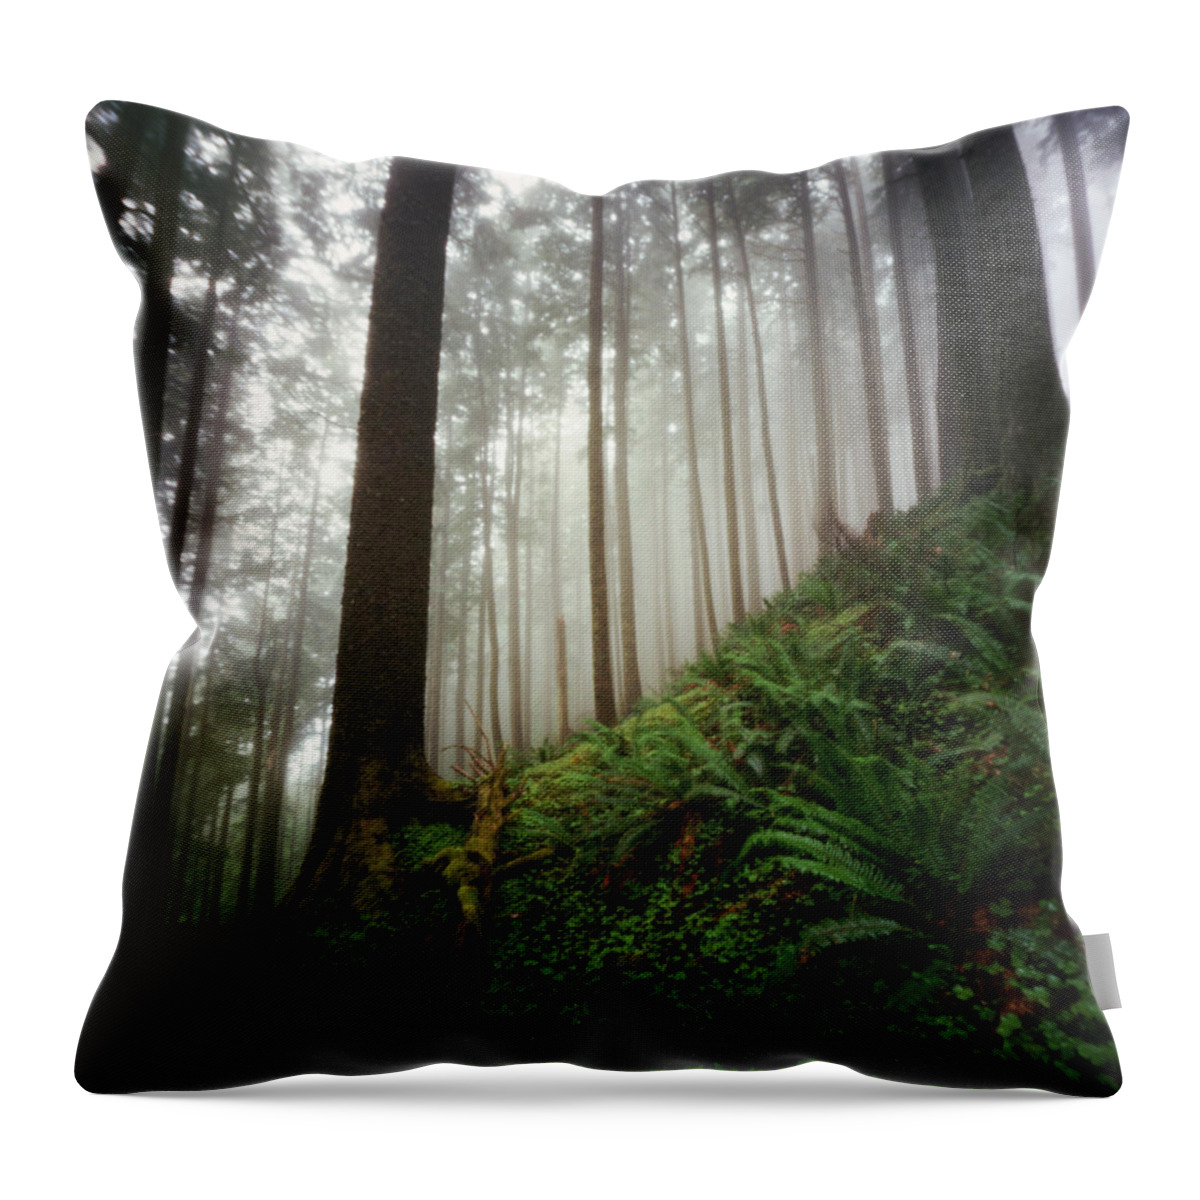 Scenics Throw Pillow featuring the photograph Ferns And Fog In A Lush Forest by Danielle D. Hughson